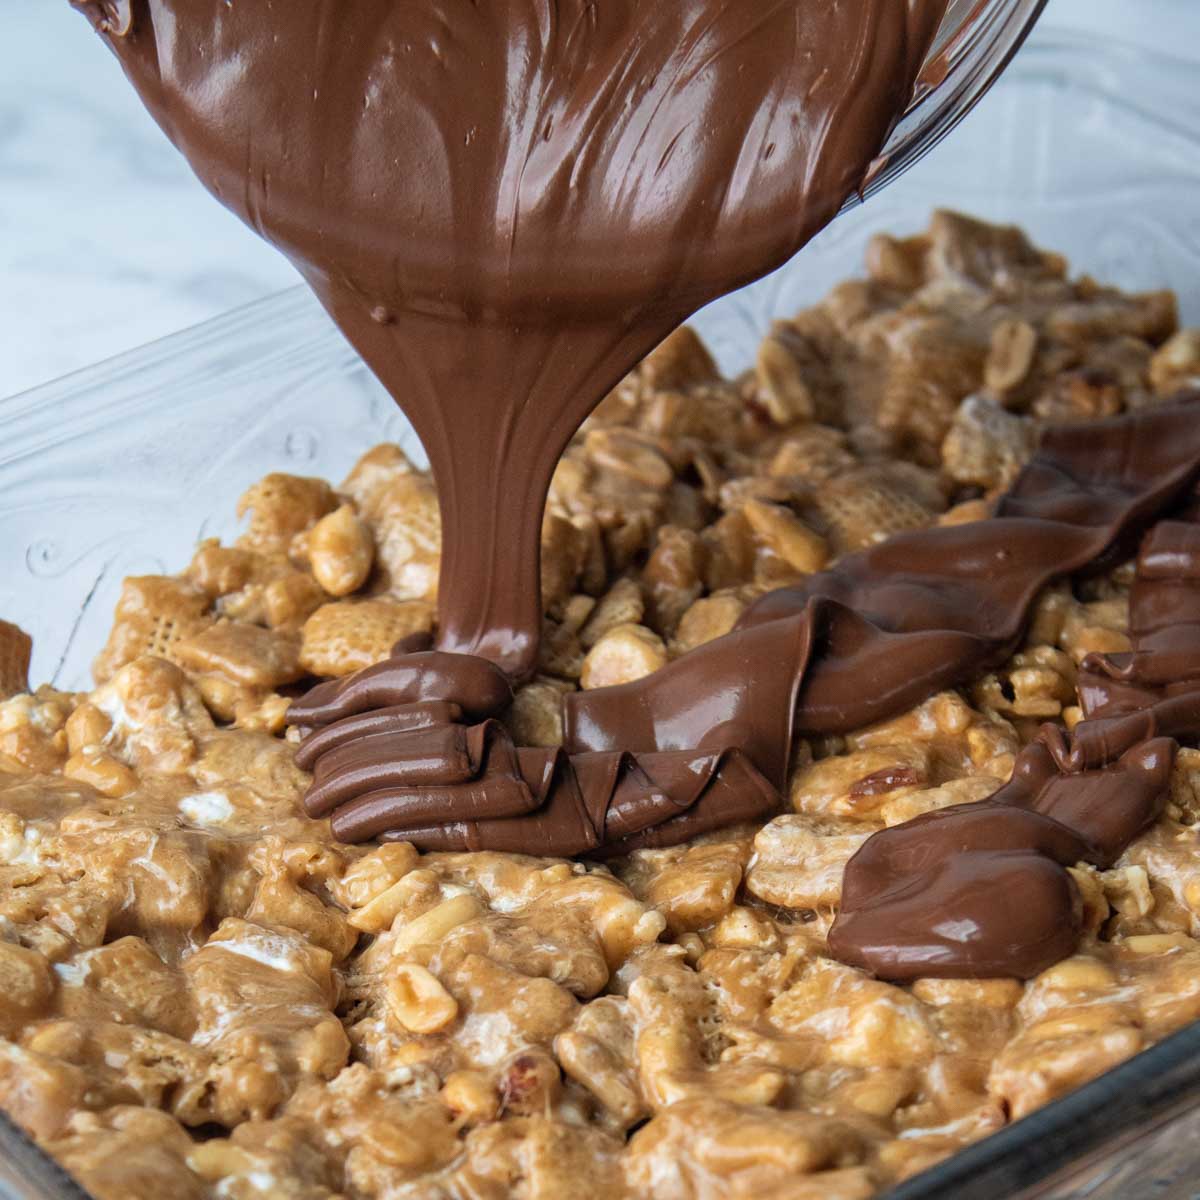 chocolate butterscotch mixture poured over the Chex bars.